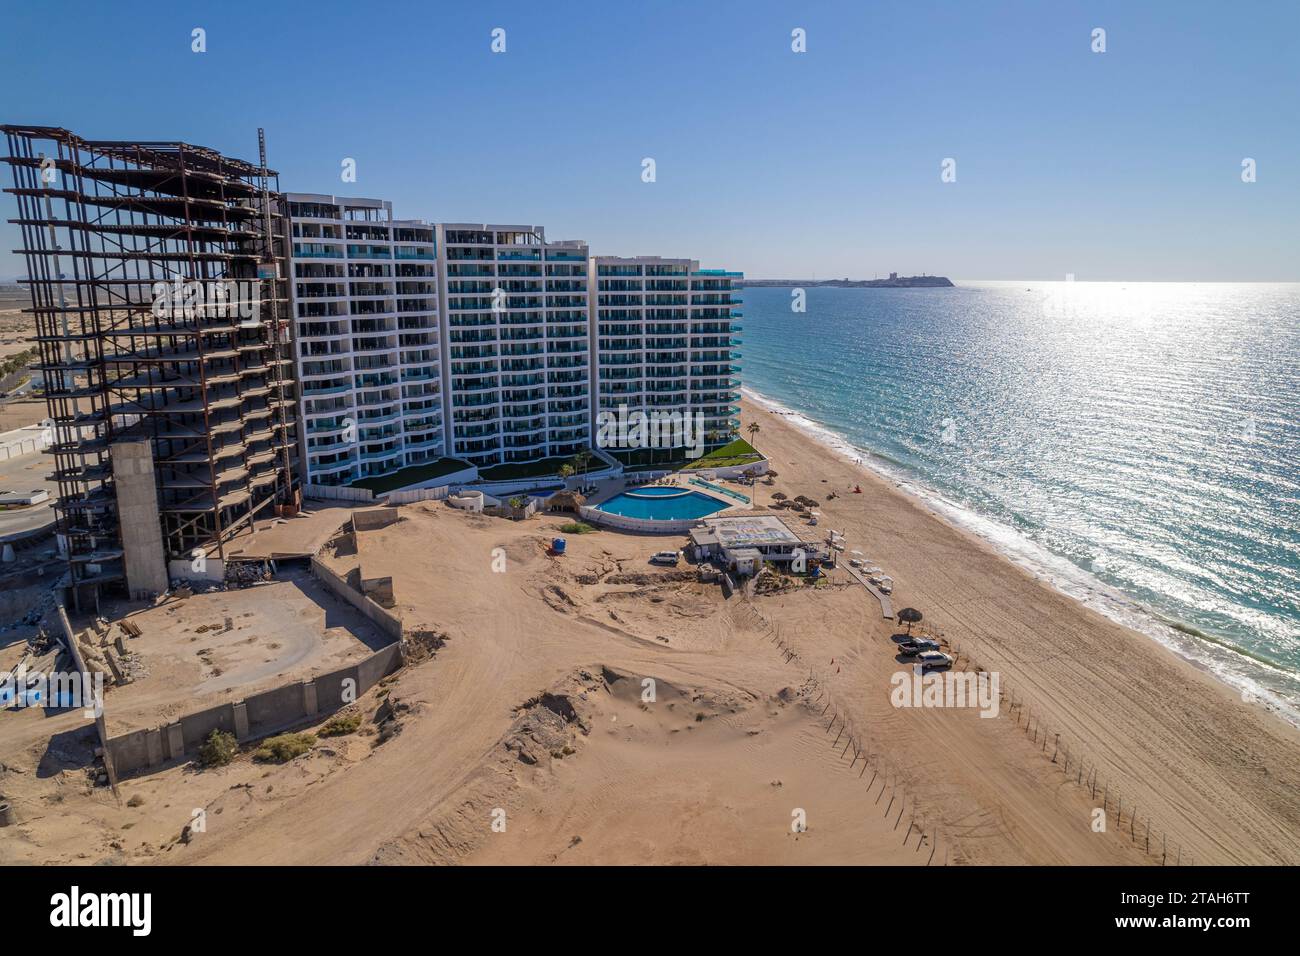 An aerial view of hotels under construction in Puerto Penasco, Sonora, Mexico Stock Photo